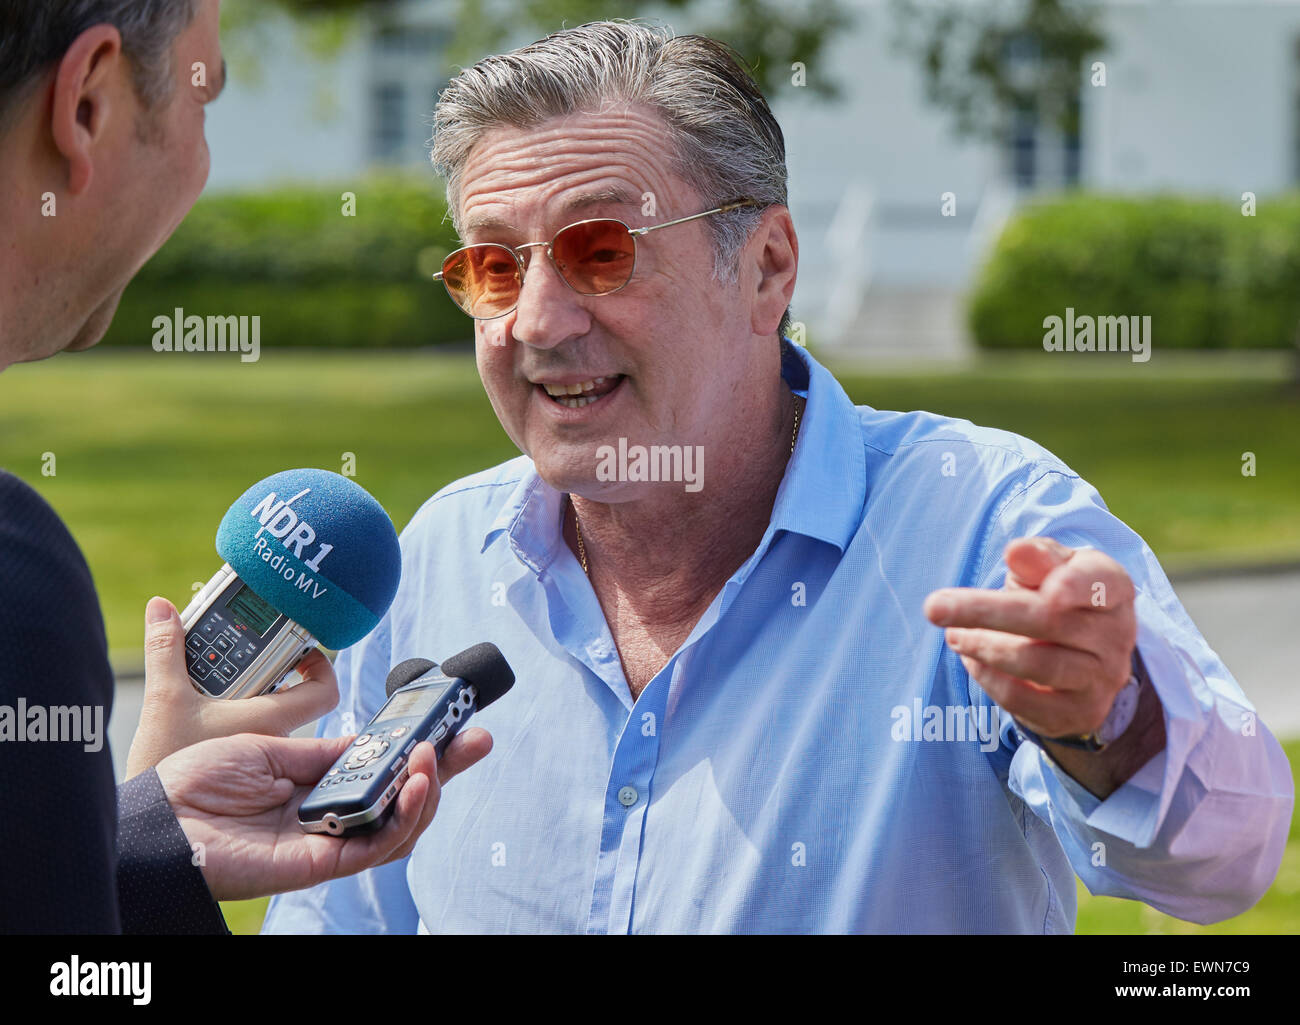 Heiligendamm, Germany. 29th June, 2015. The French actor Daniel Auteuil gives an interview in the margins of the shooting of the Italian-French film production 'Le Confessioni' in Heiligendamm, Germany, 29 June 2015. The thriller is to celebrate its premiere at Cannes film festival in 2016. Photo: GEORG WENDT/dpa/Alamy Live News Stock Photo